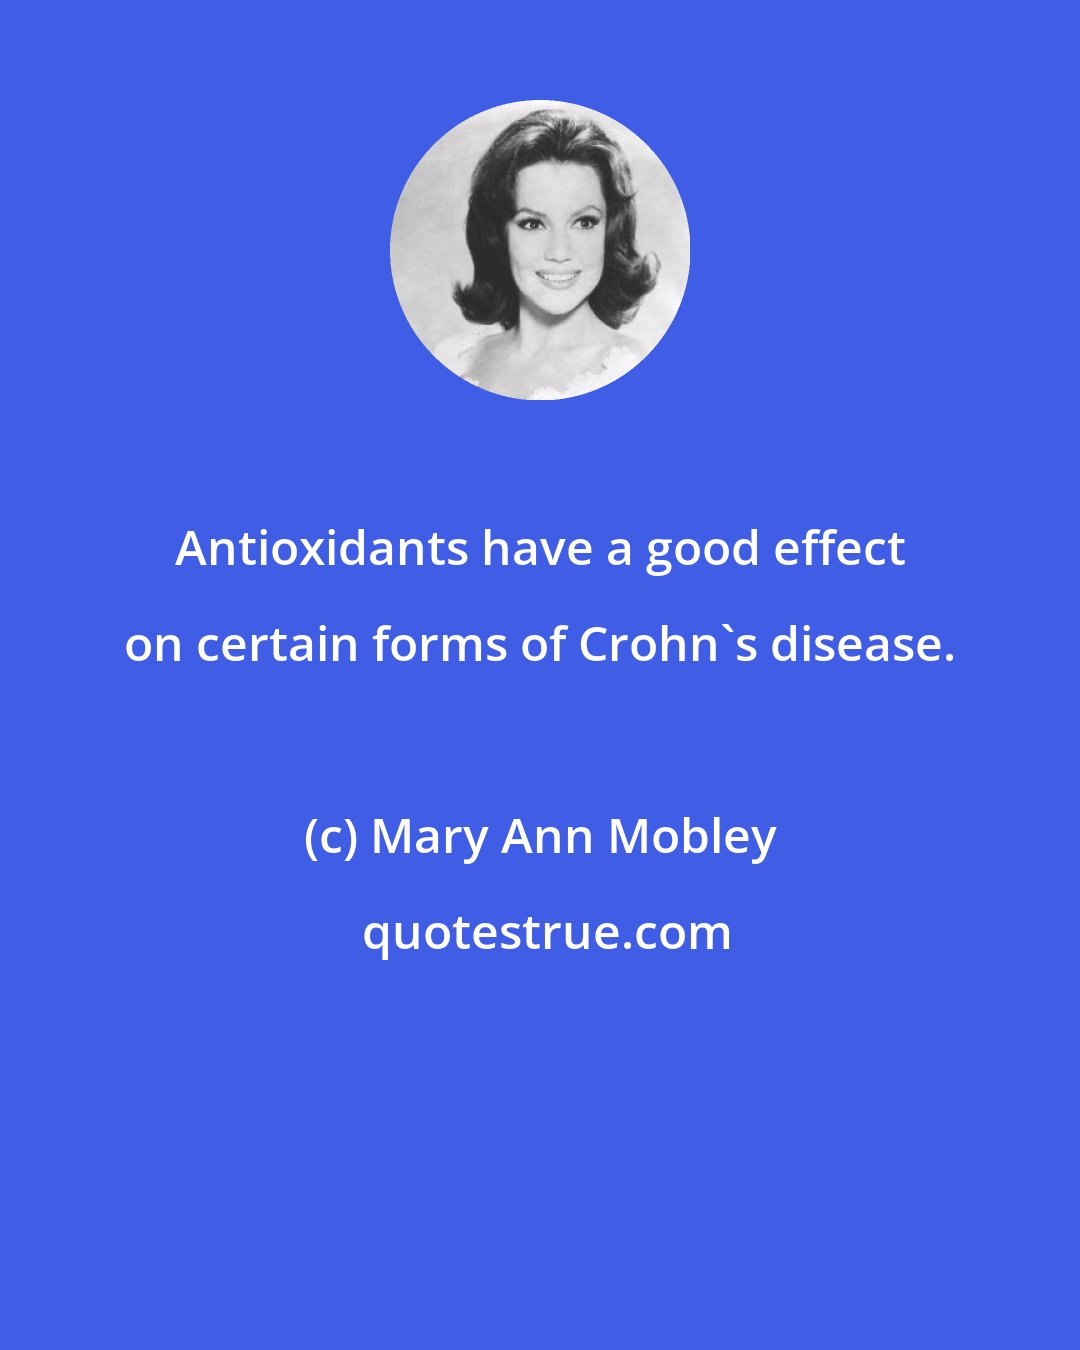 Mary Ann Mobley: Antioxidants have a good effect on certain forms of Crohn's disease.